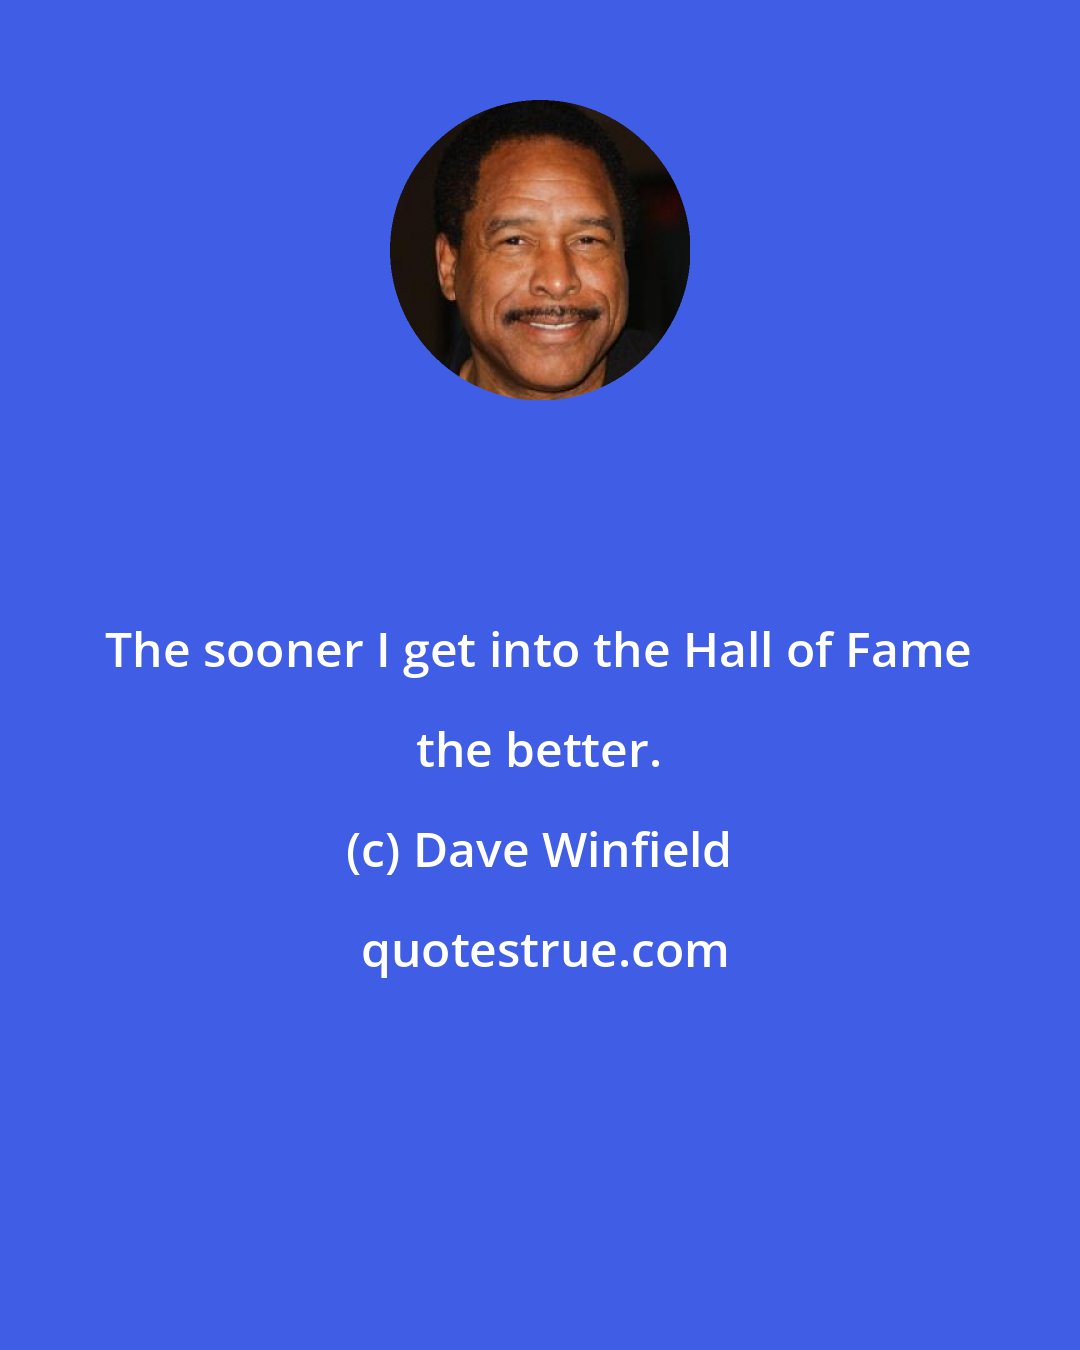 Dave Winfield: The sooner I get into the Hall of Fame the better.